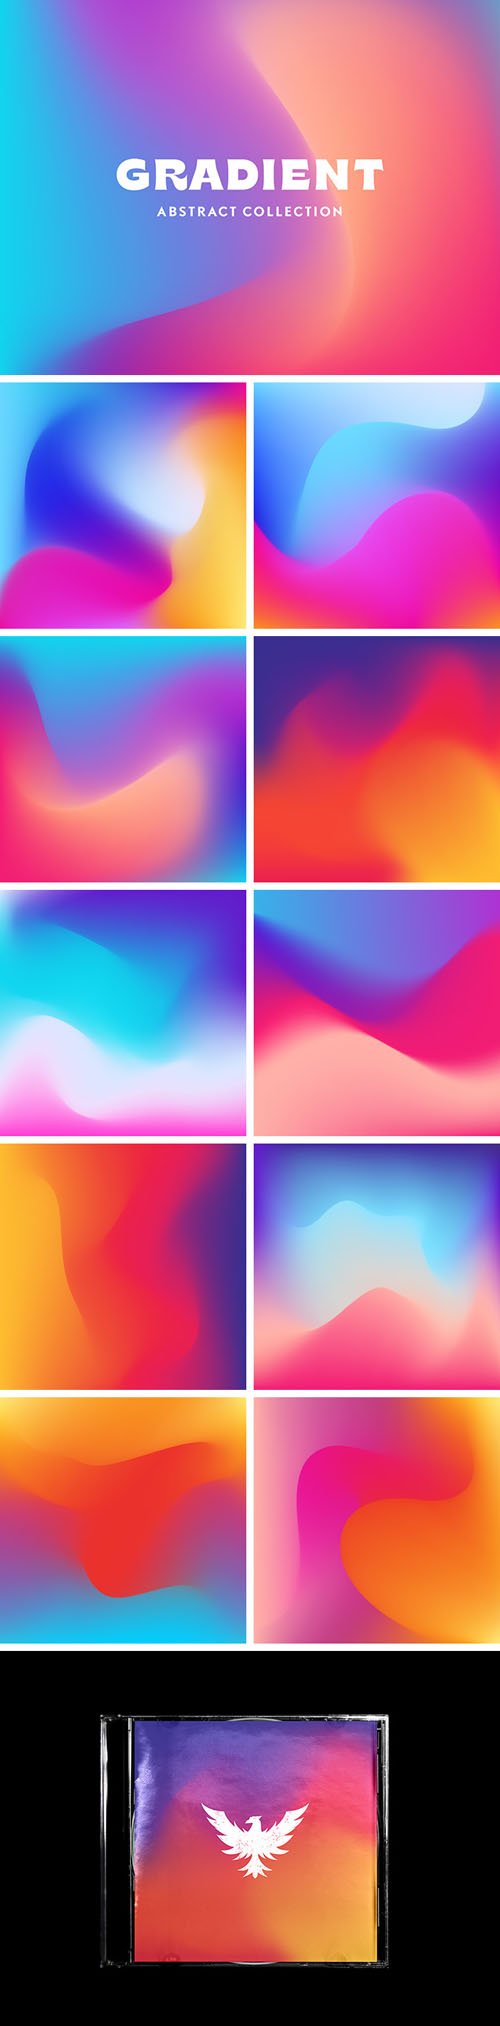 Gradient Abstract Textures Vector Collection